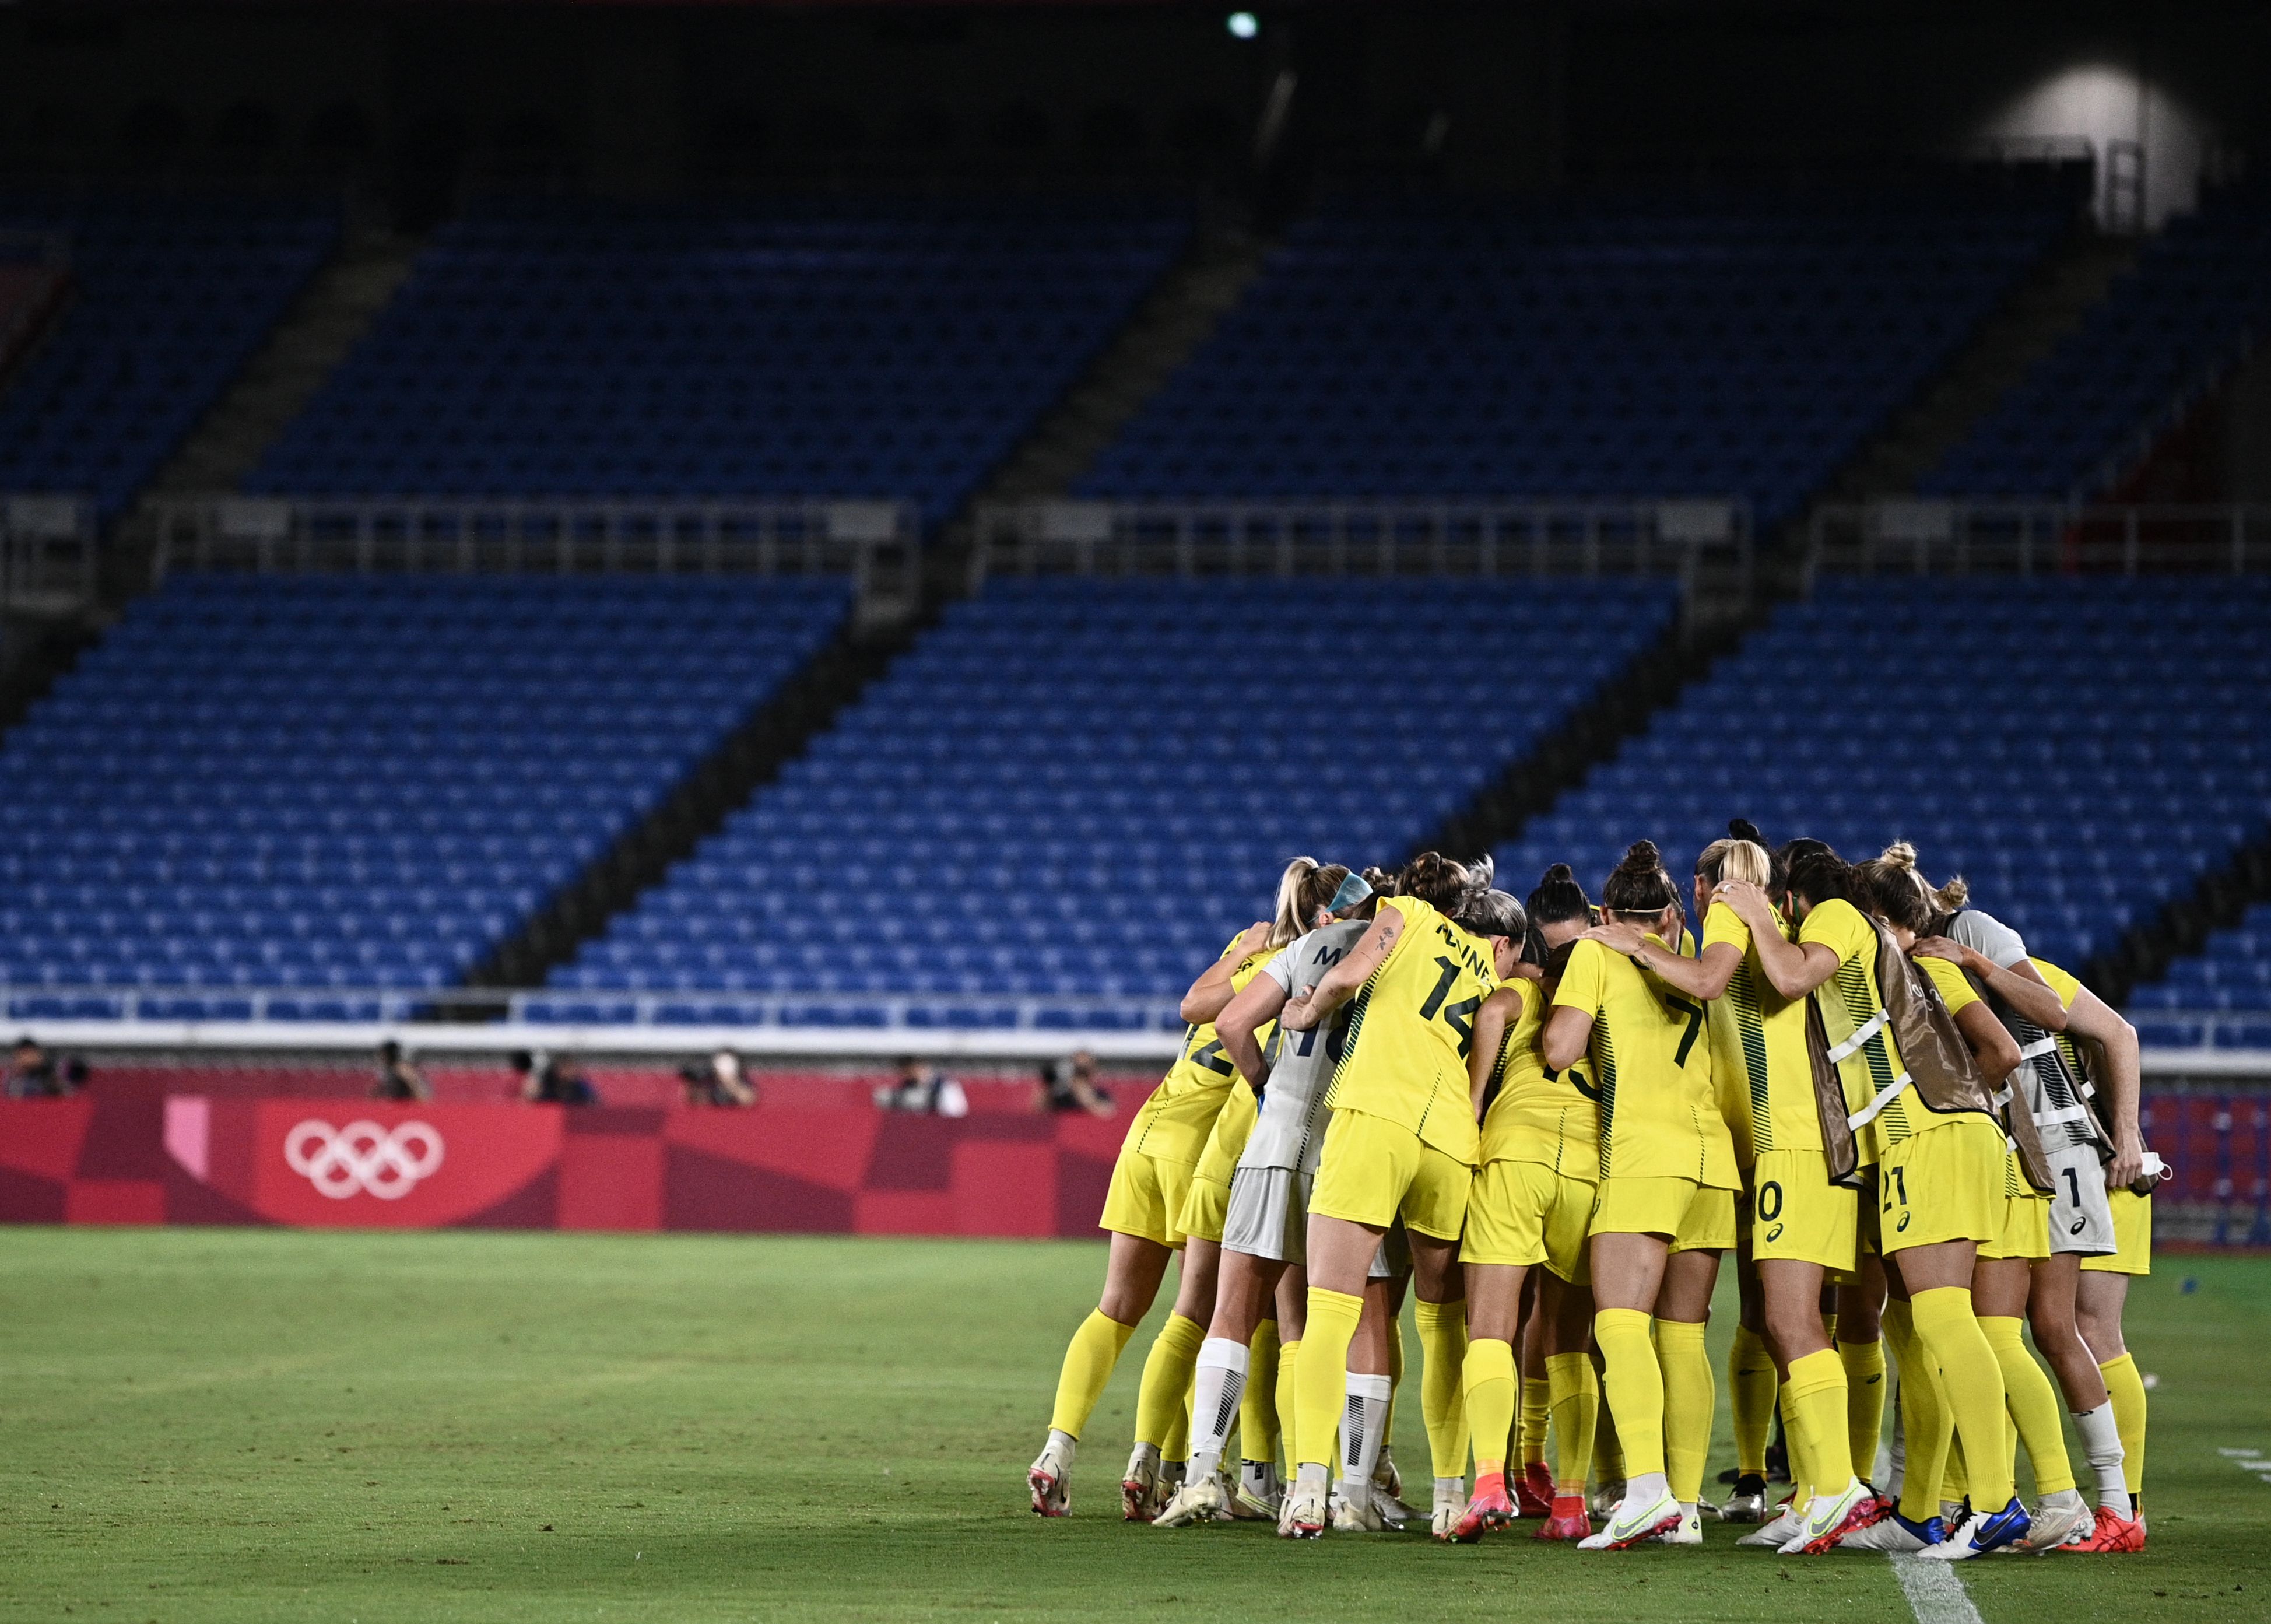 Players of Team Australia line up during the match between Australia and Sweden on day ten of the Tokyo 2020 Olympic Games at International Stadium Yokohama on August 02, 2021 in Yokohama, Kanagawa, Japan. (Photo by Zhizhao Wu/Getty Images)